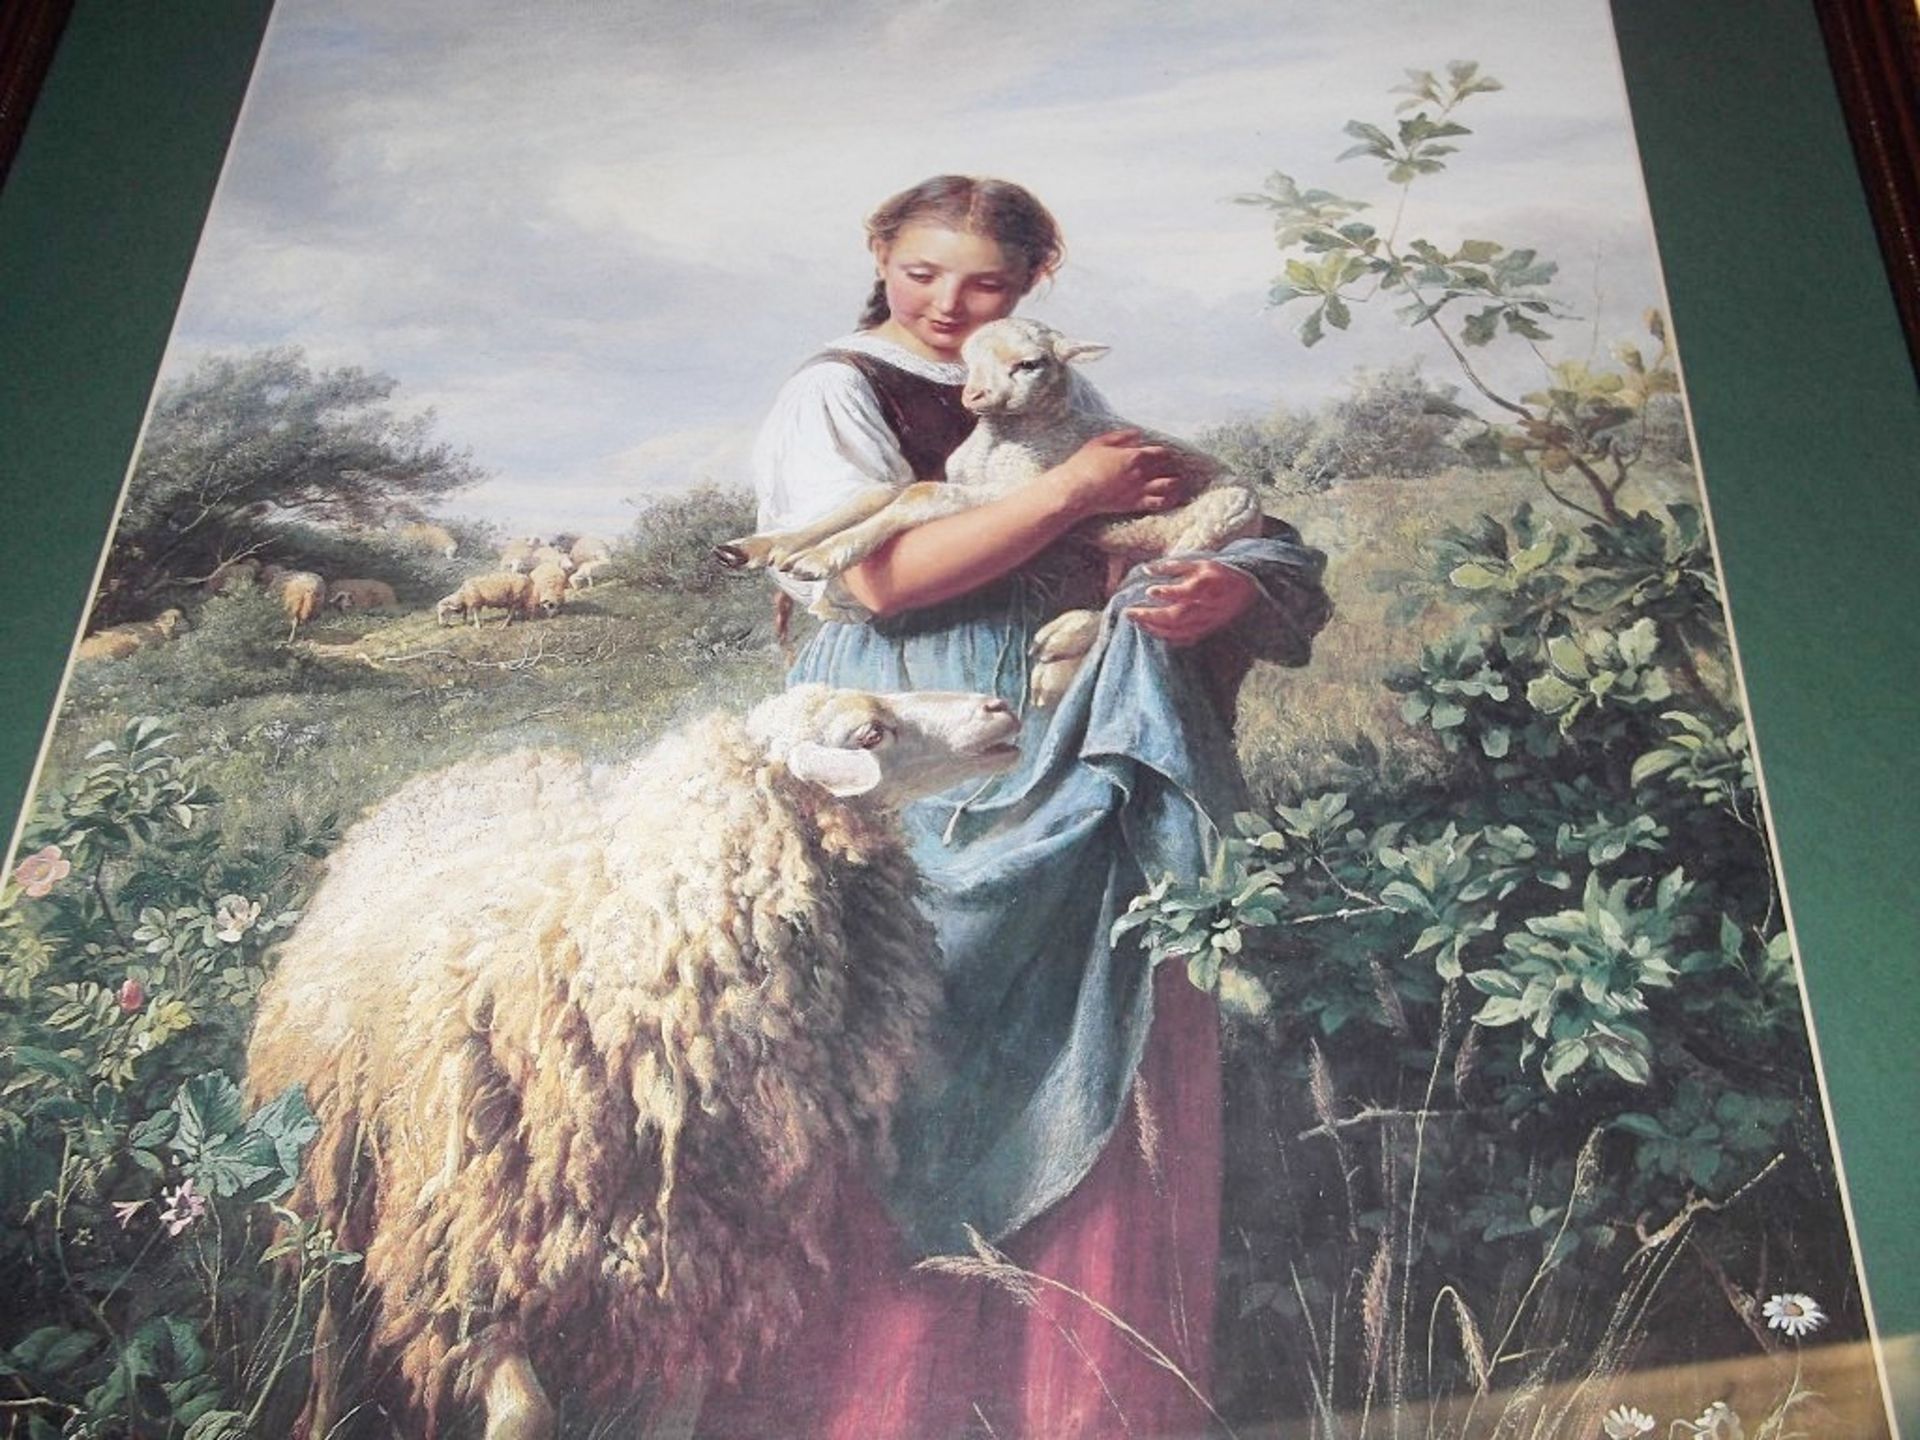 1 x Framed Art Print - The Shepherdess, 1866, Hofner - Pre-owned In Lovely Condition - Dimensions: - Image 3 of 3